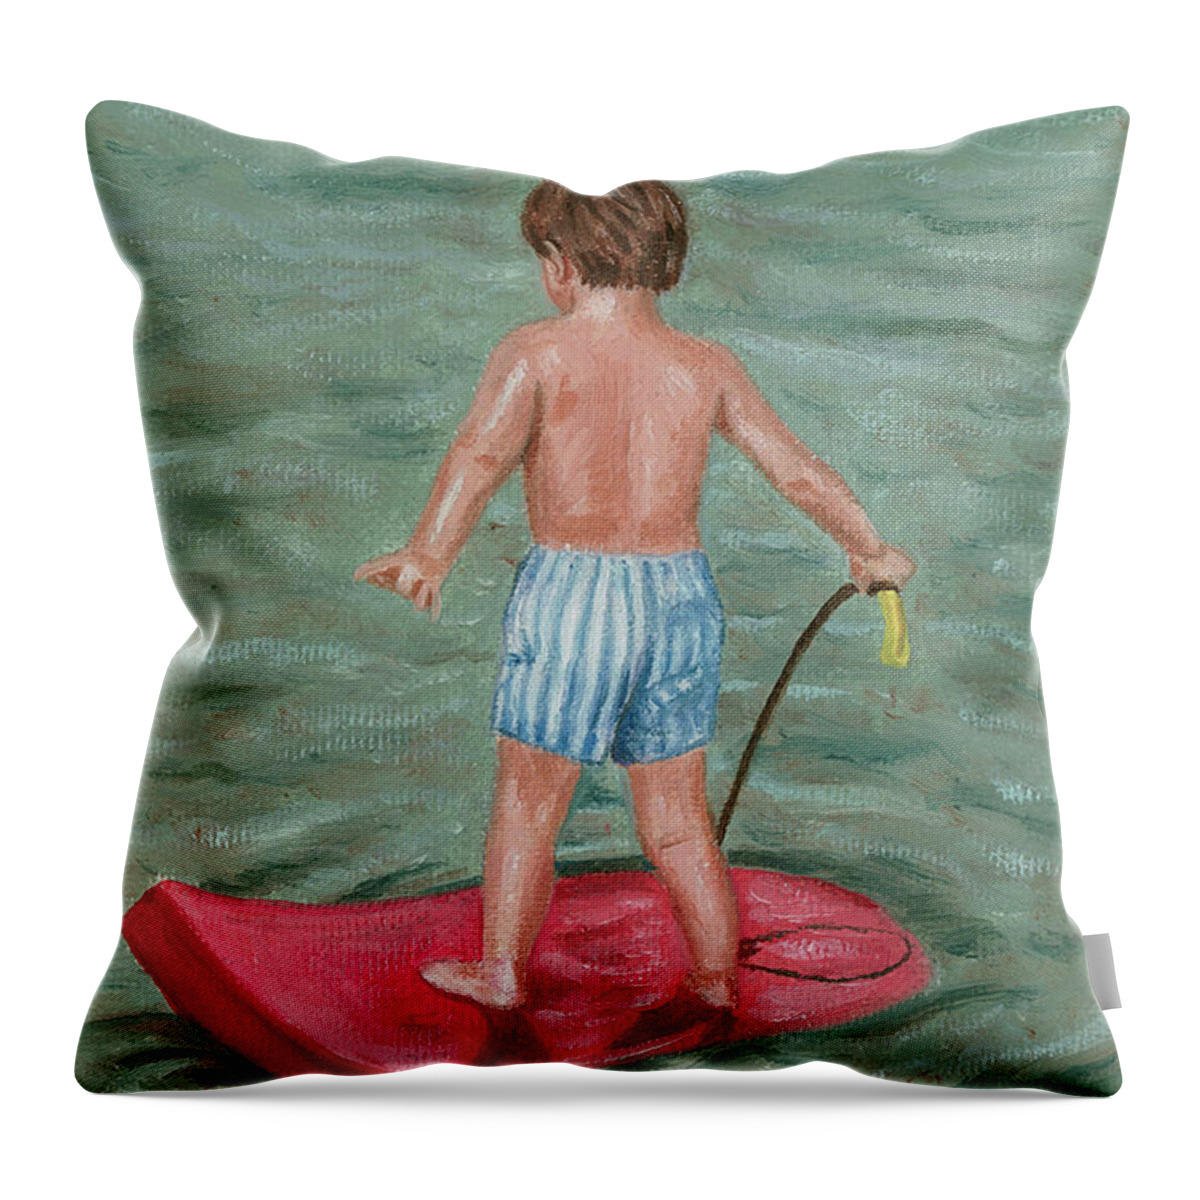 Boy Throw Pillow featuring the painting Surfer in Training by Jill Ciccone Pike